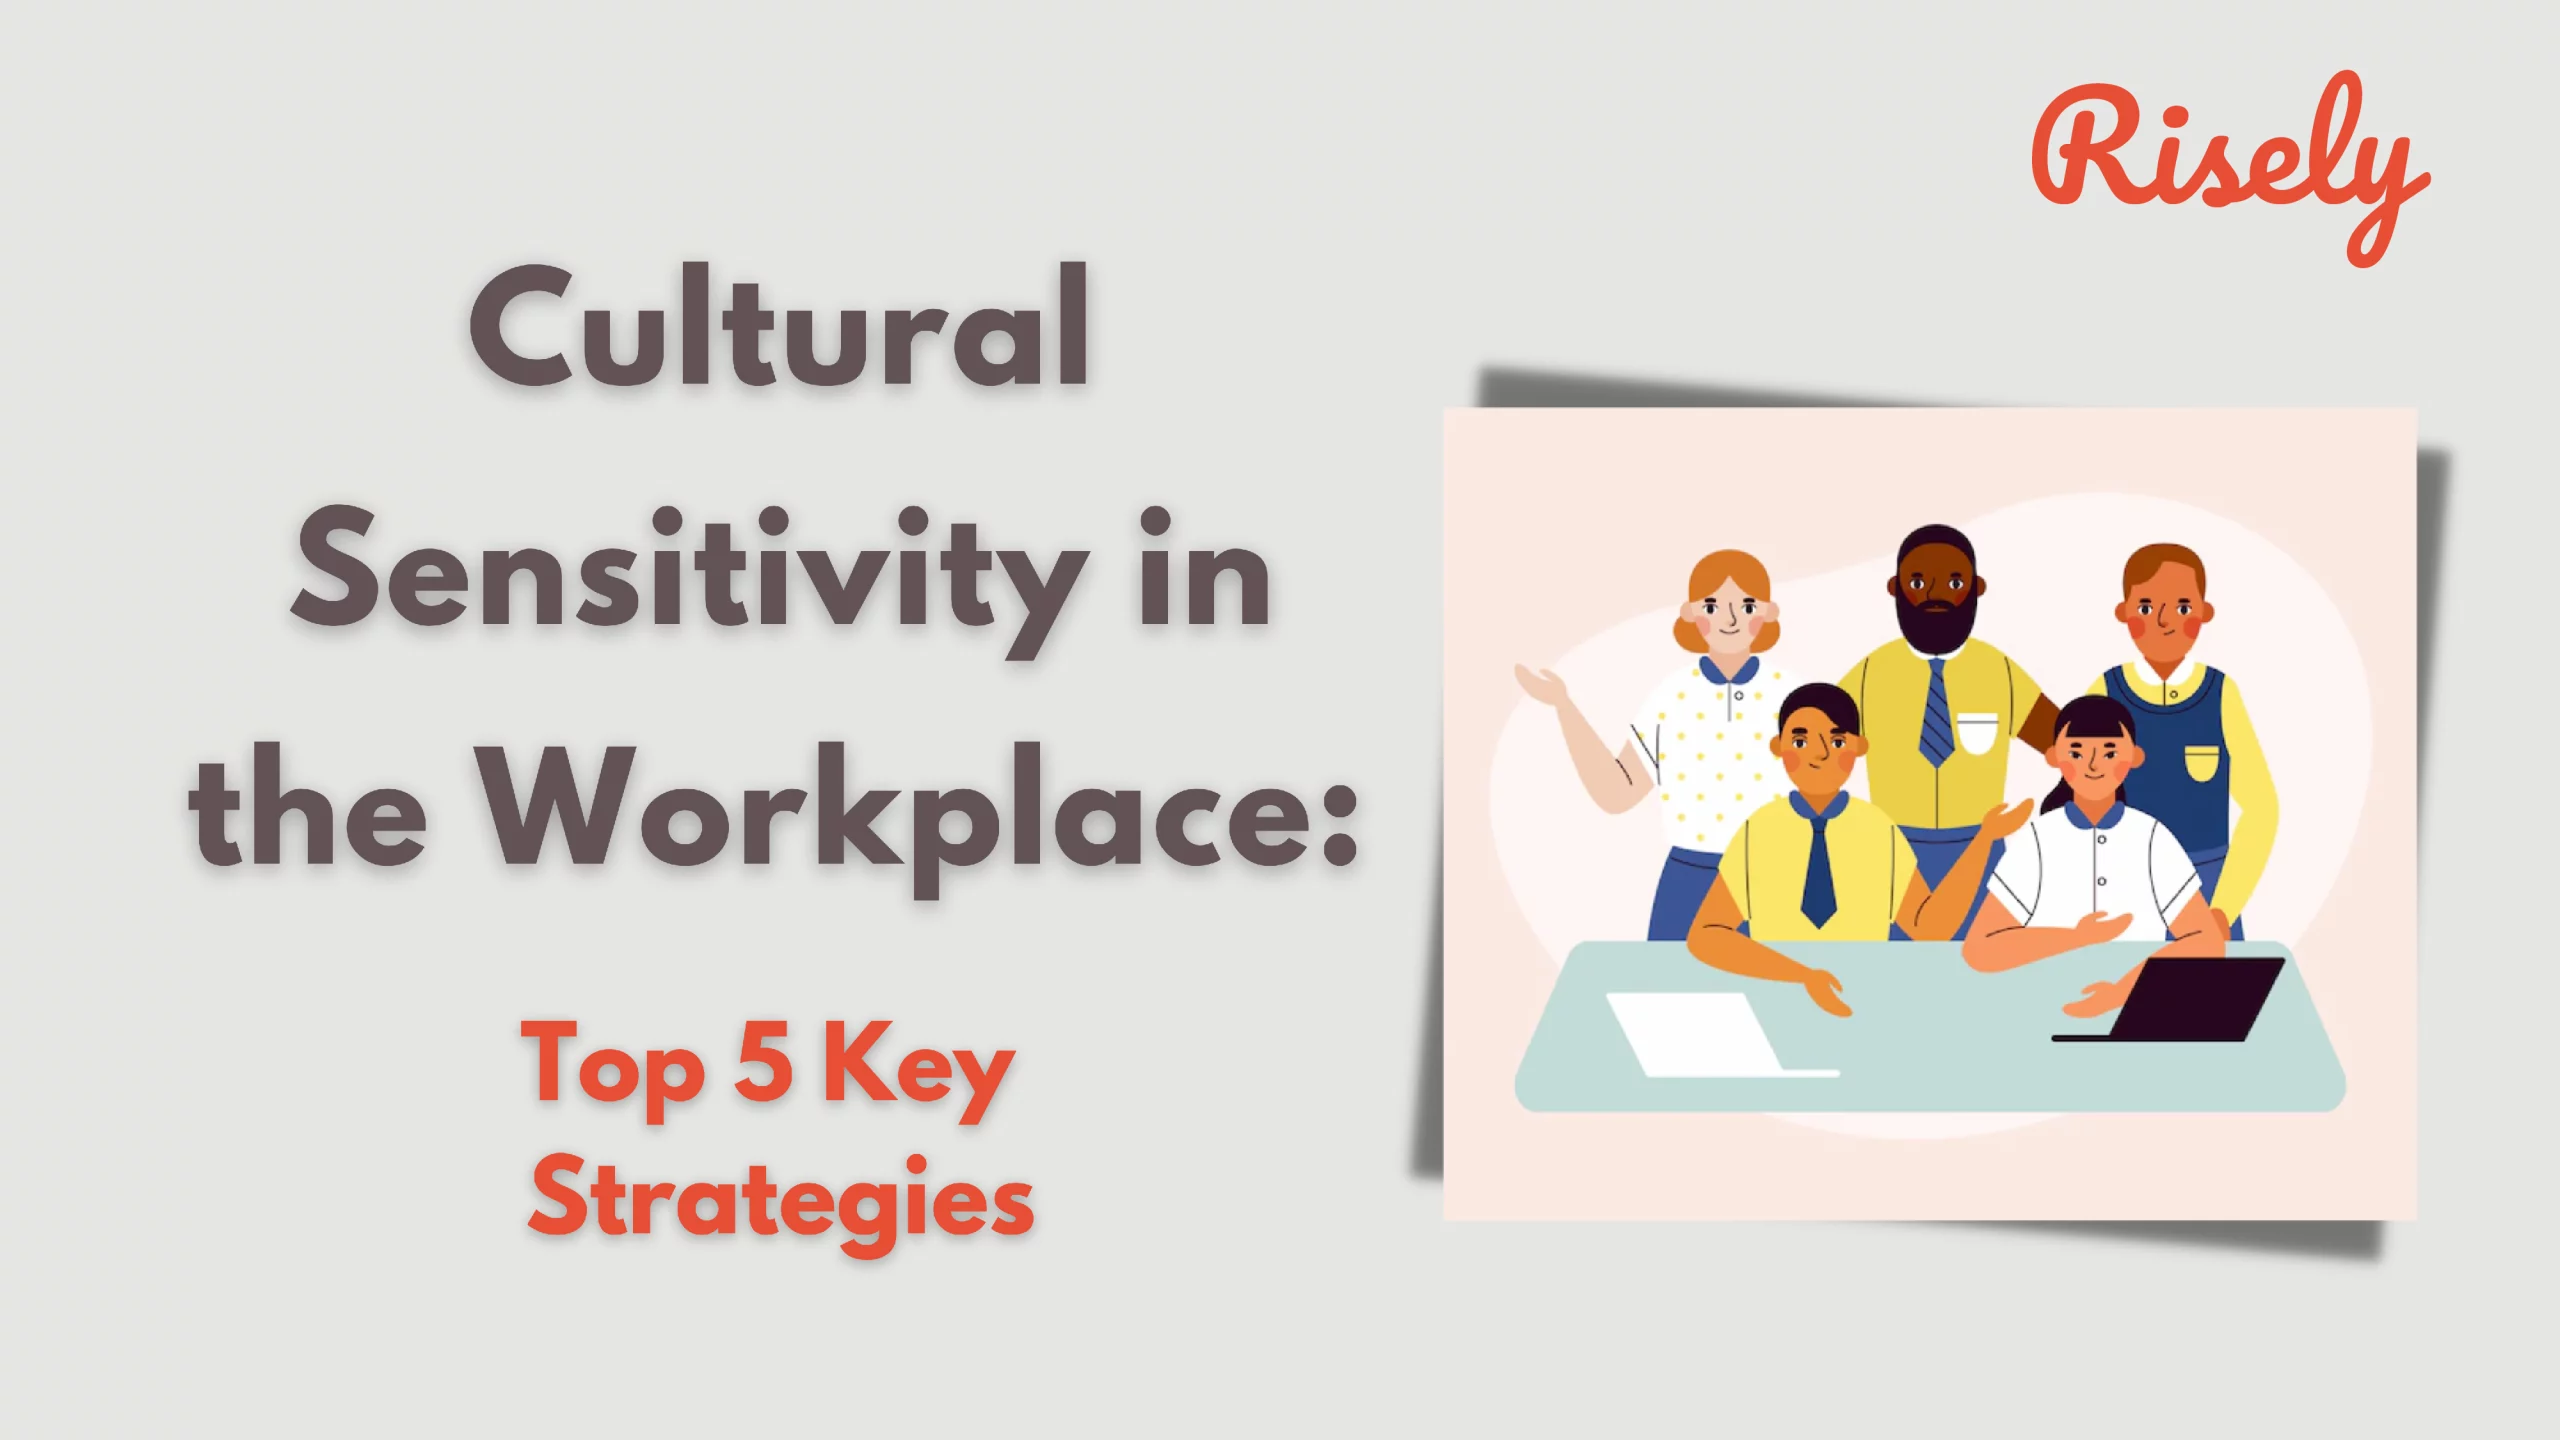 Cultural sensitivity in the workplace